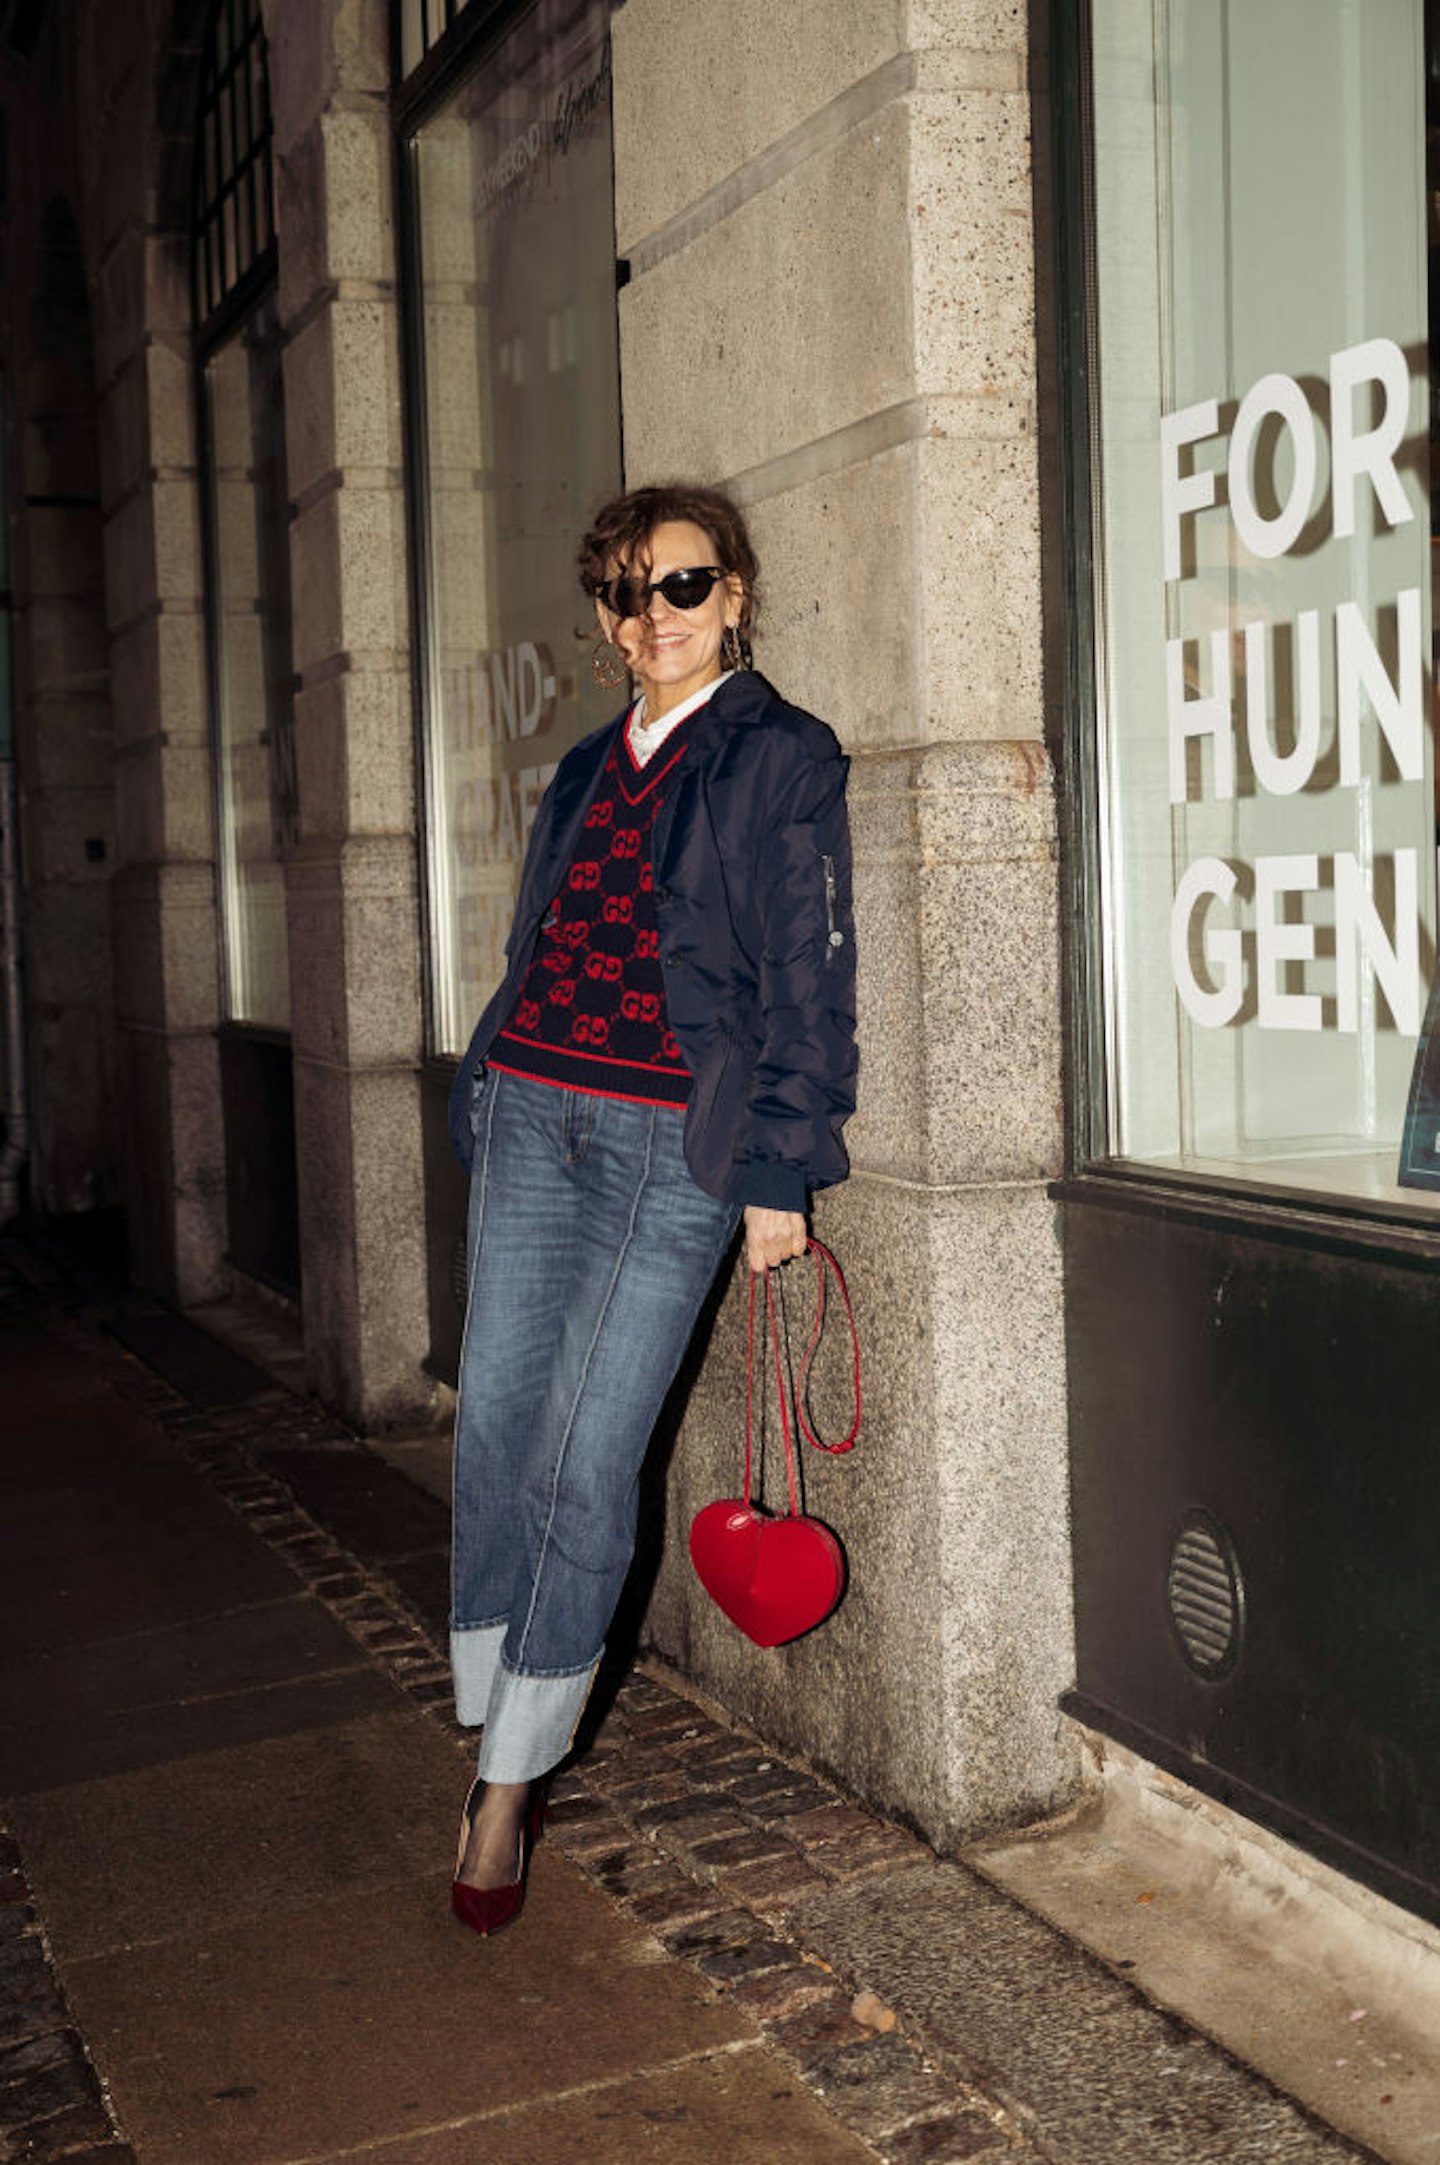 Everyone Is Wearing Heart Shape Bags - We Love These High-Street